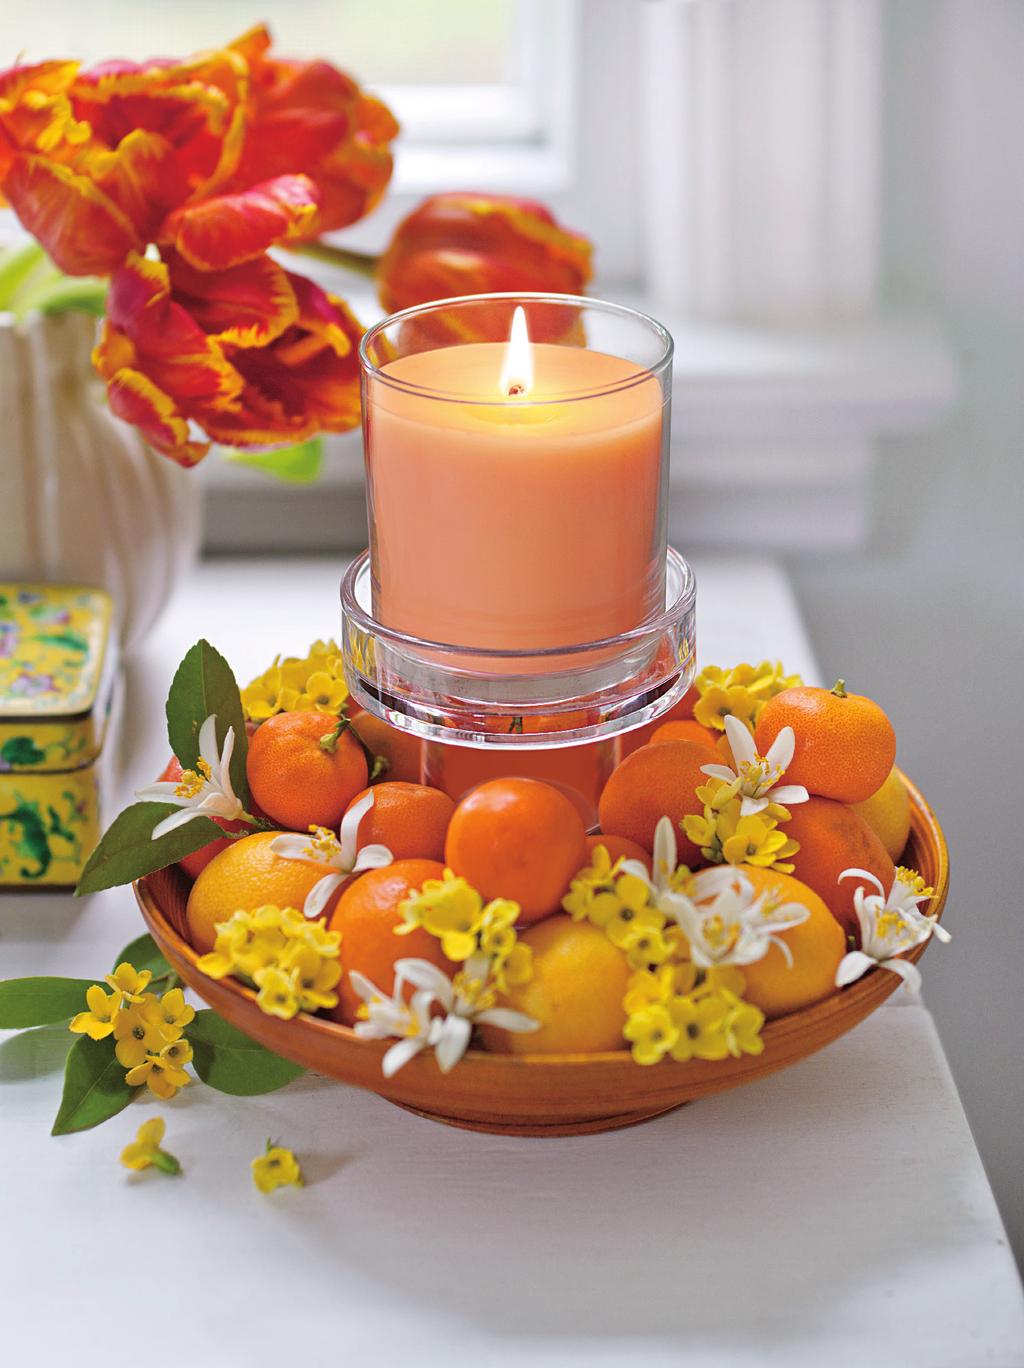 QUALITY STORY WHY OUR JAR CANDLES ARE THE BEST Highly-scented, long-lasting fragrance in a convenient jar.